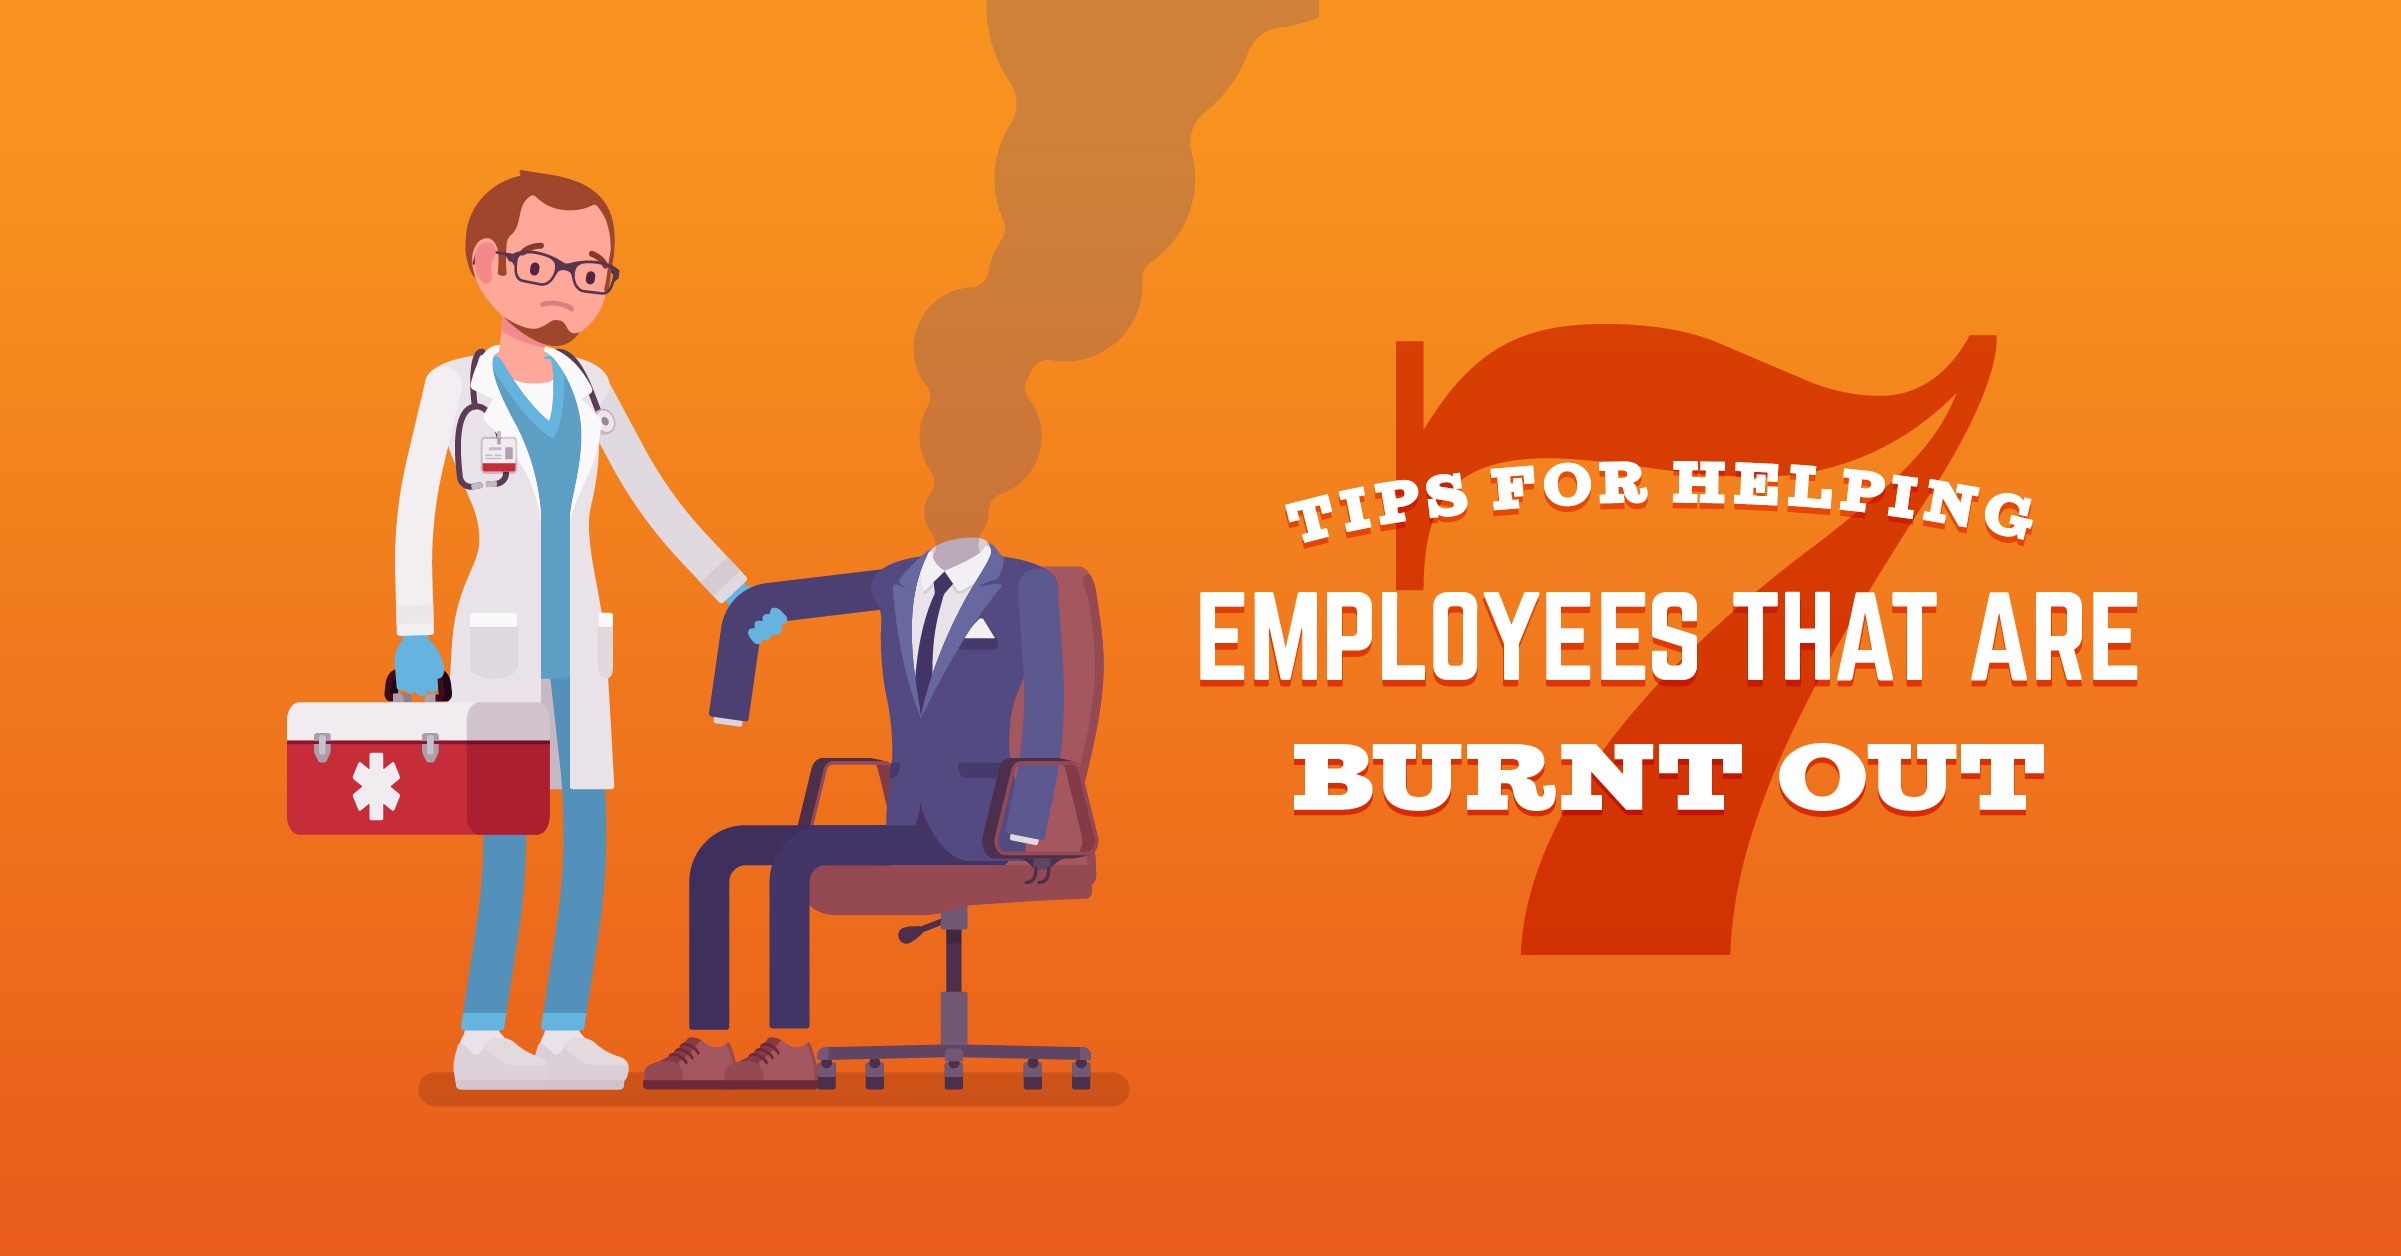 7 Tips for Helping Employees That Are Burnt Out